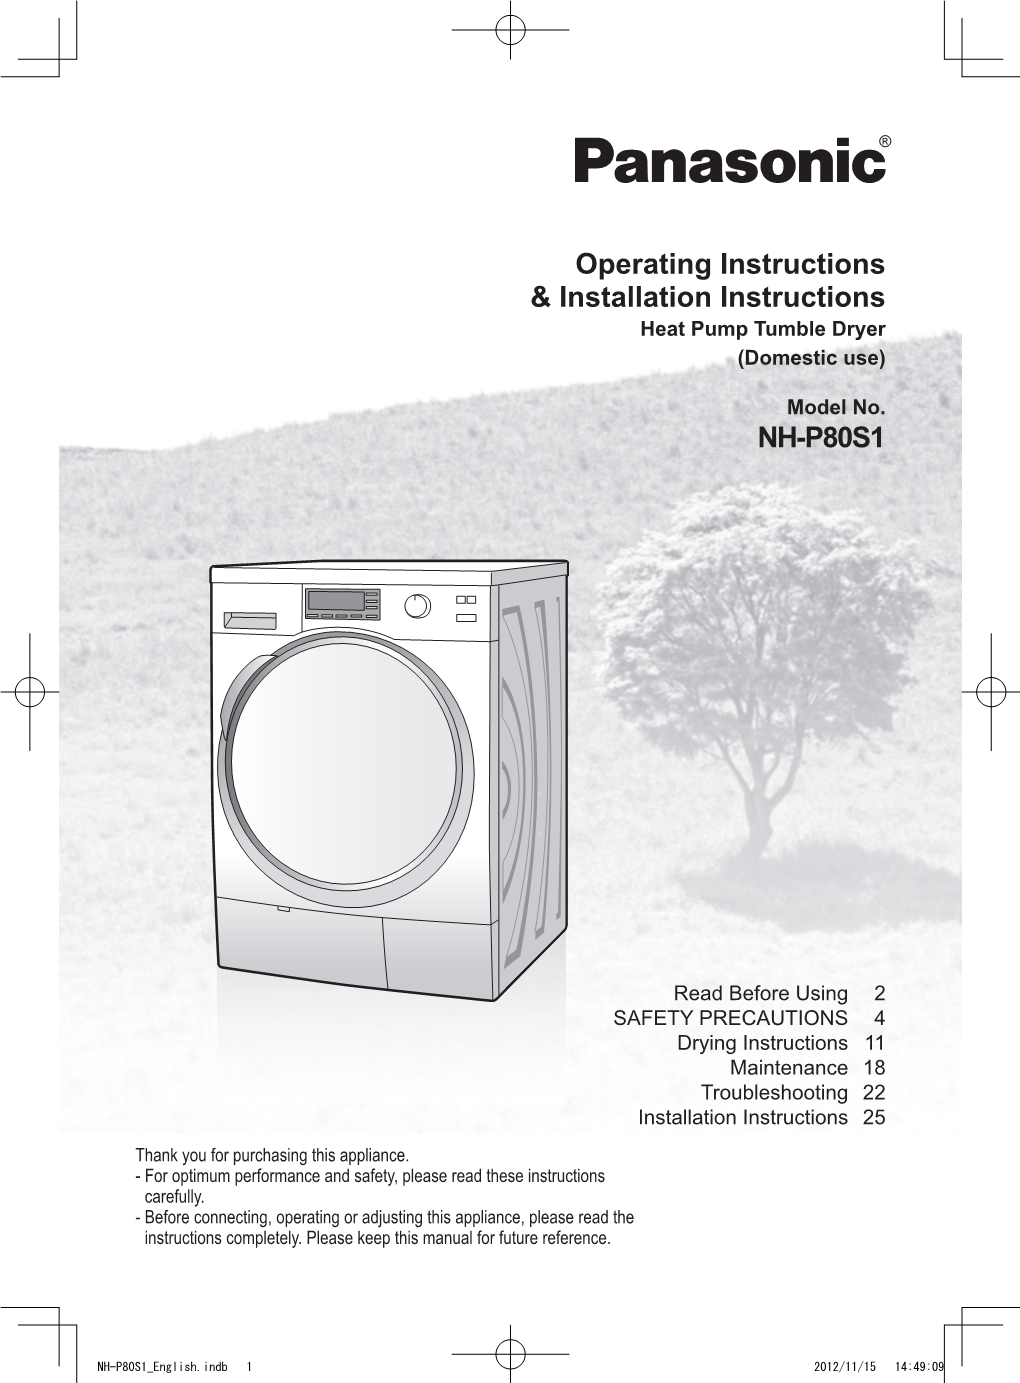 Operating Instructions & Installation Instructions NH-P80S1